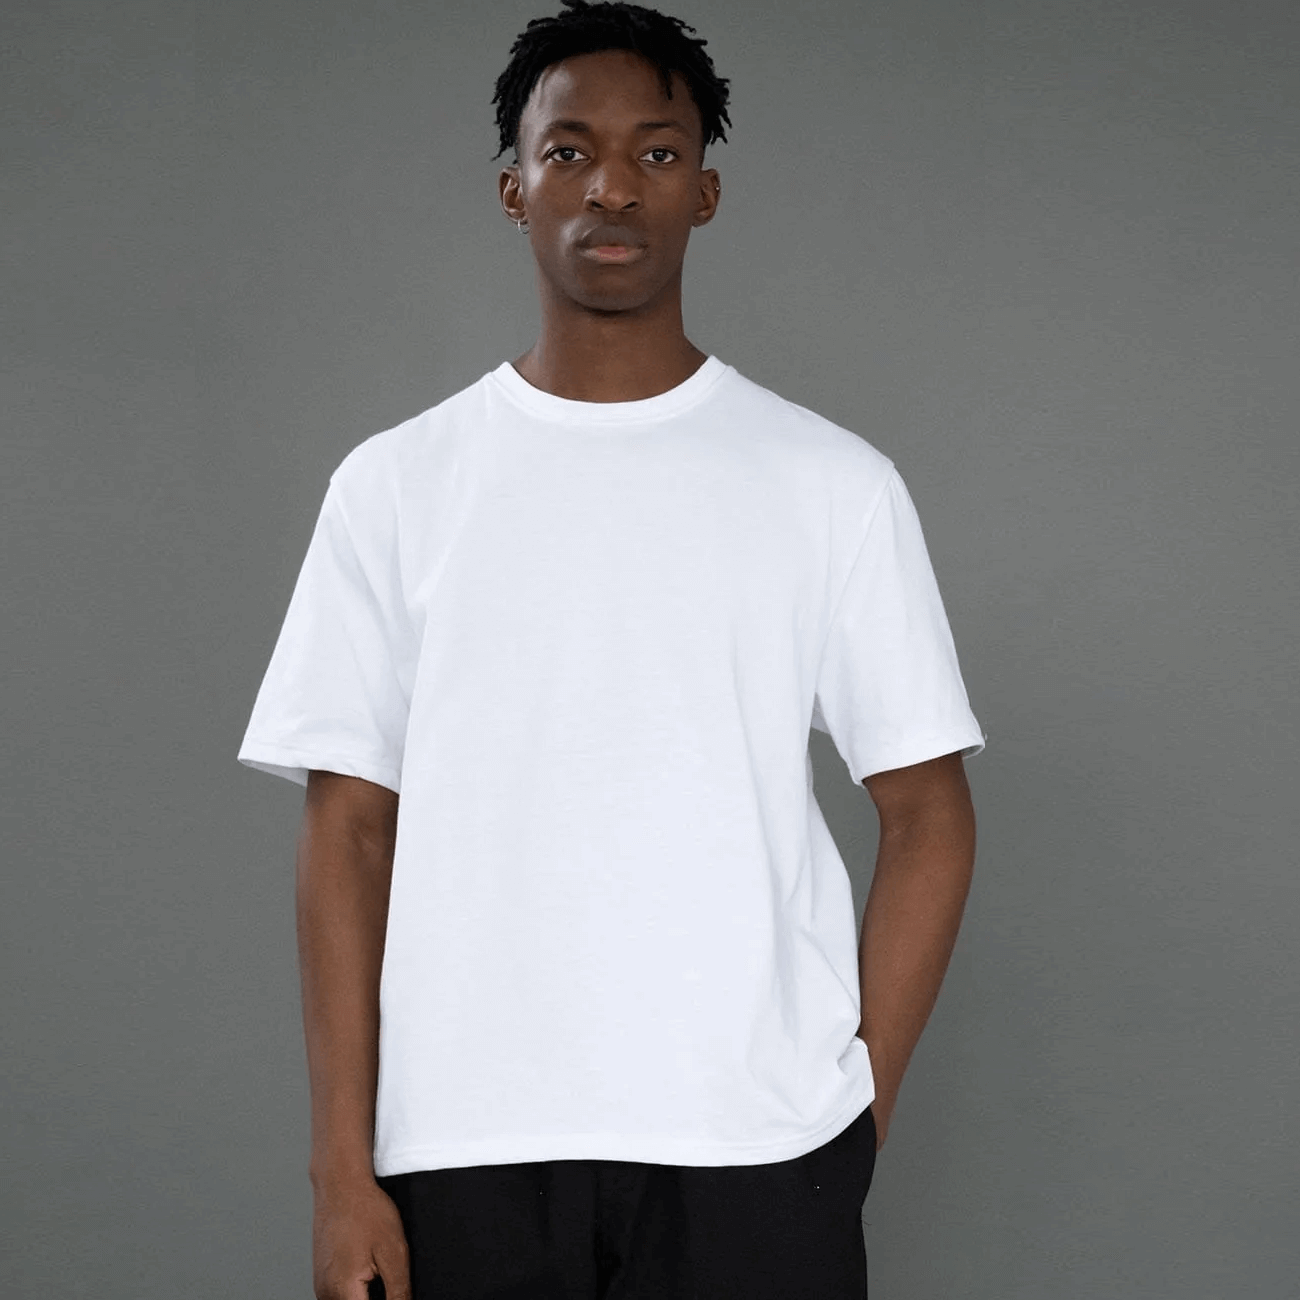 Image of Base Organic Heavy T-Shirt made in the UK by WAWWA. Buying this product supports a UK business, jobs and the local community